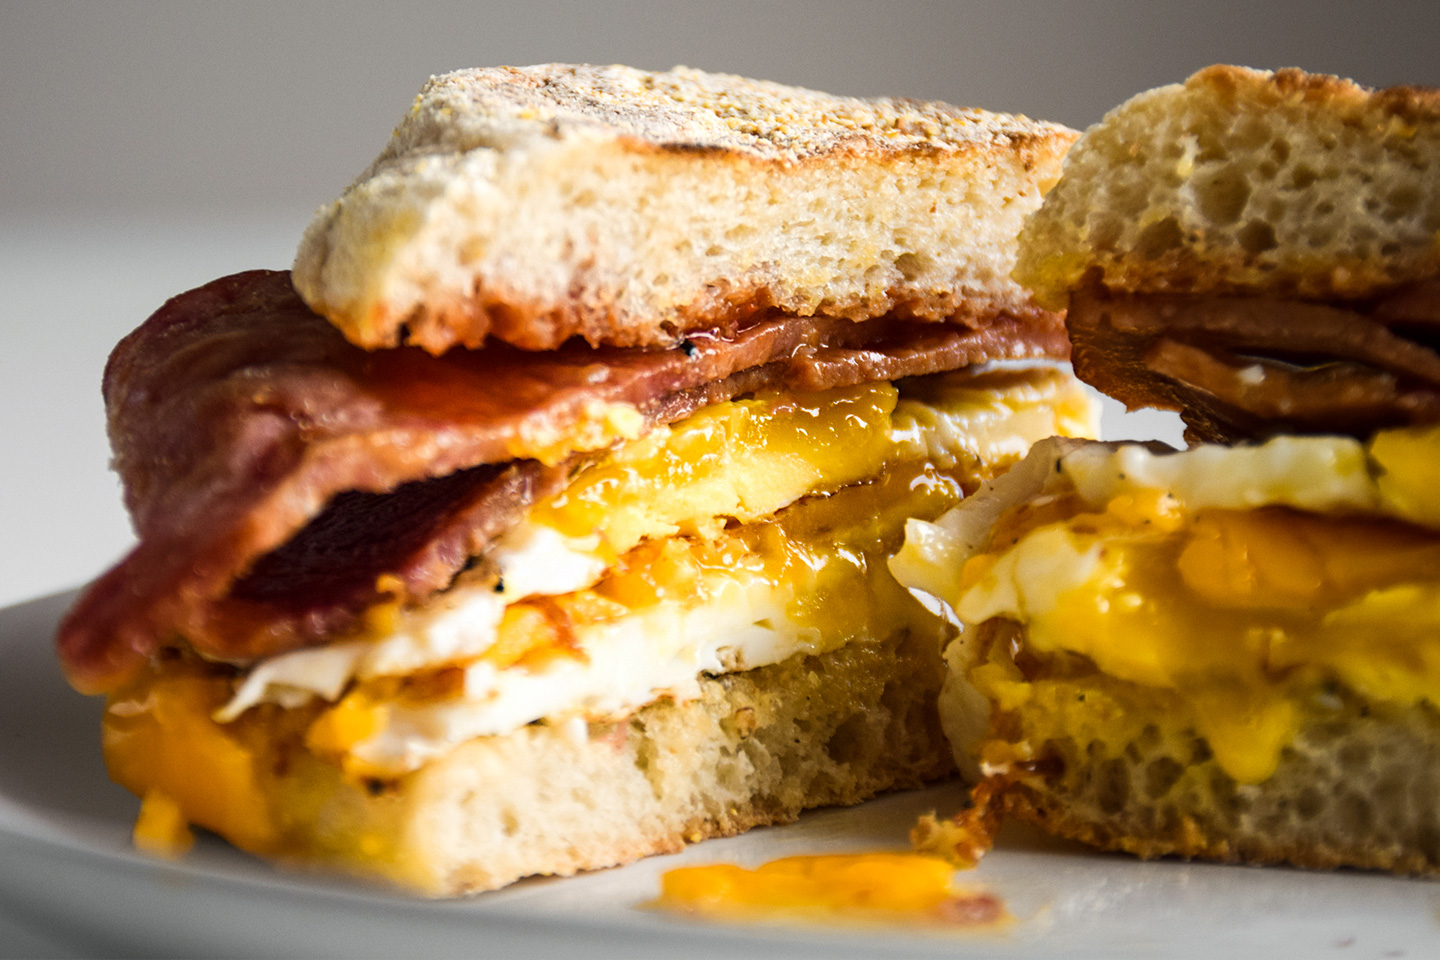 Best Breakfast Sandwich Recipe - How To Make A Bacon, Egg and Cheese